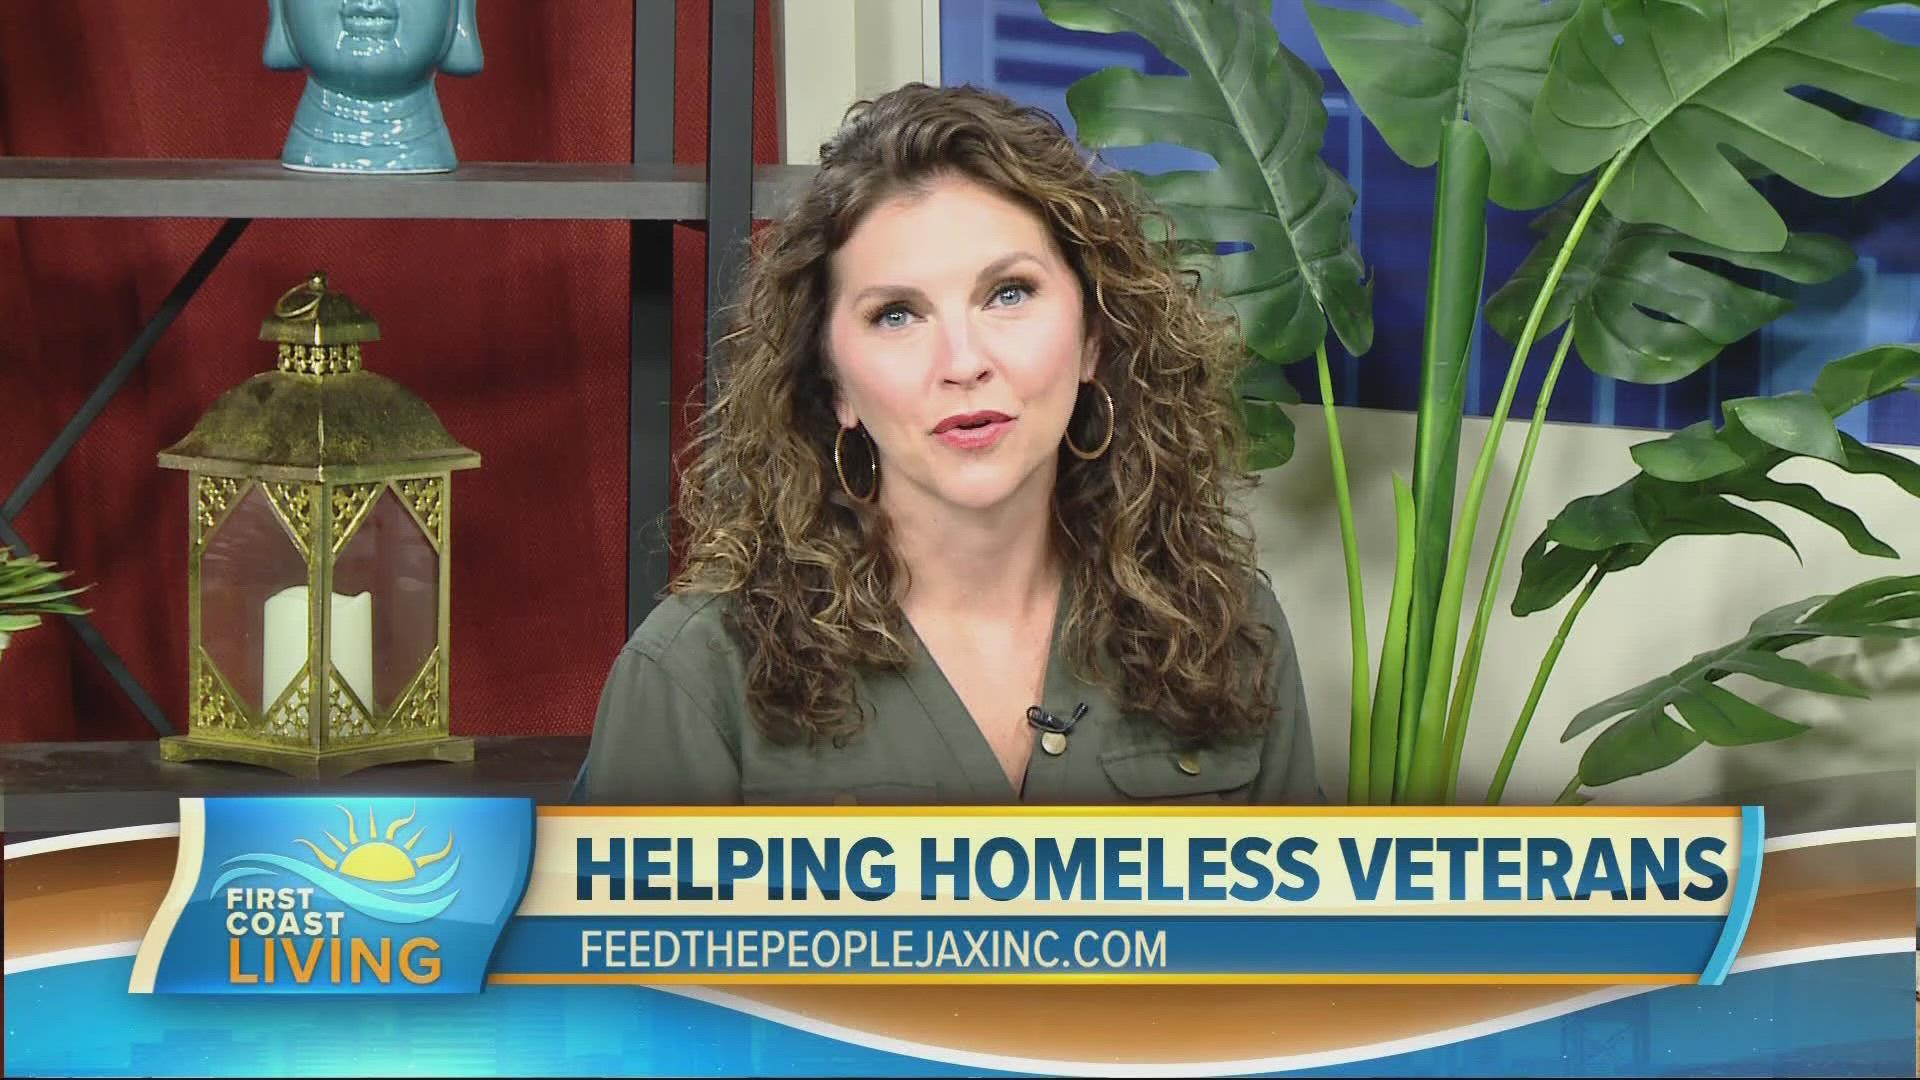 A Marine Corps veteran overcame homelessness and has since founded a nonprofit organization serving homeless veterans & the less fortunate in the Jacksonville area.